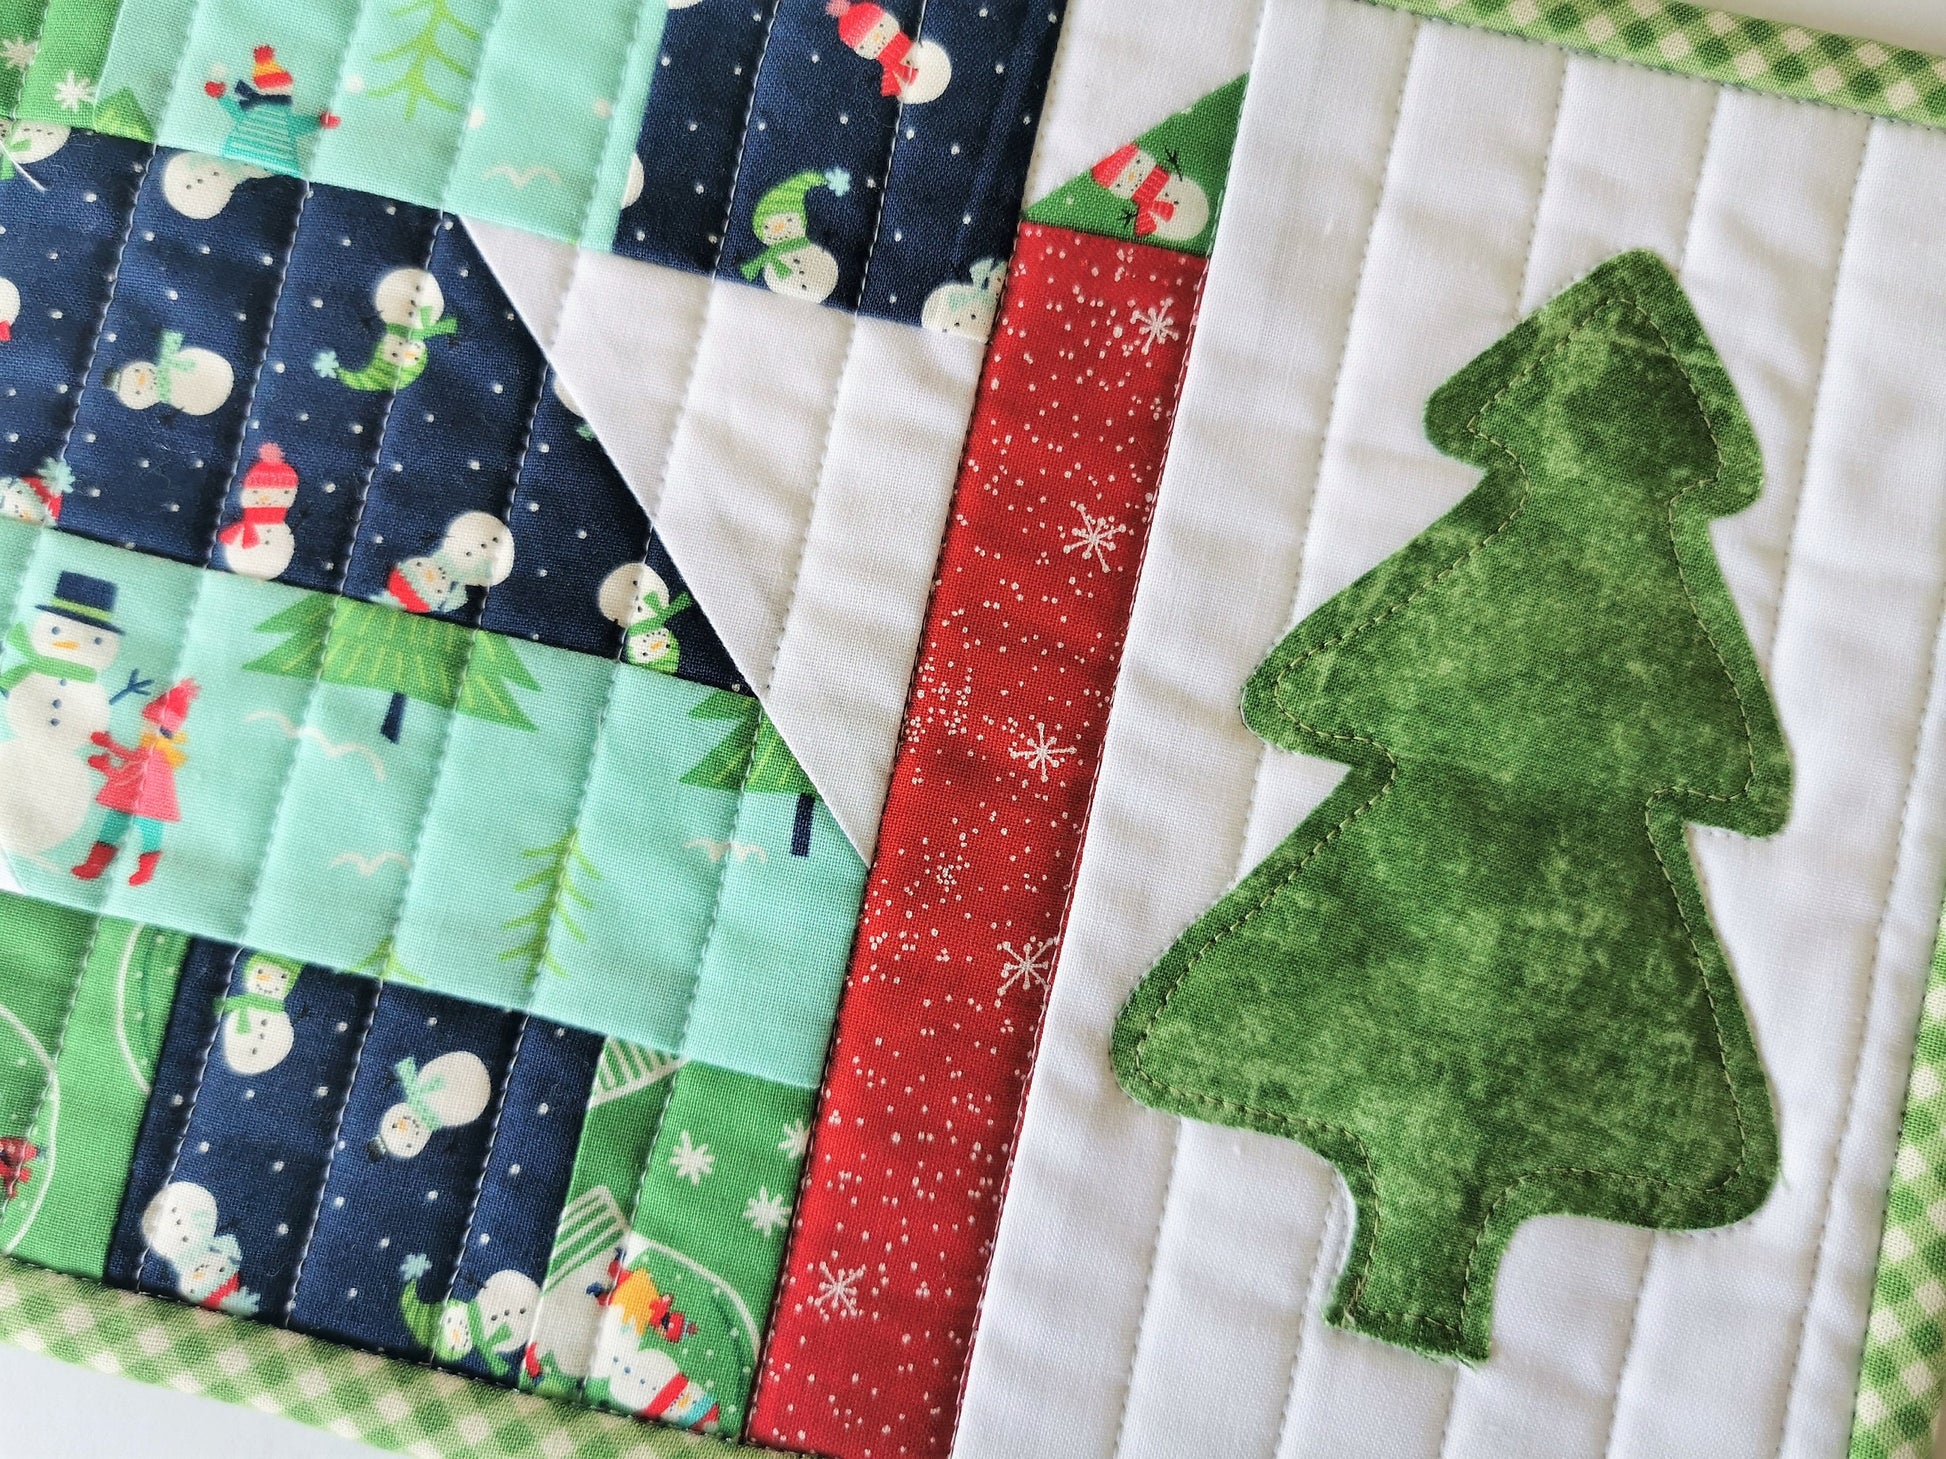 scrap quilt patchwork and appliqued tree make a cute christmas snack mat